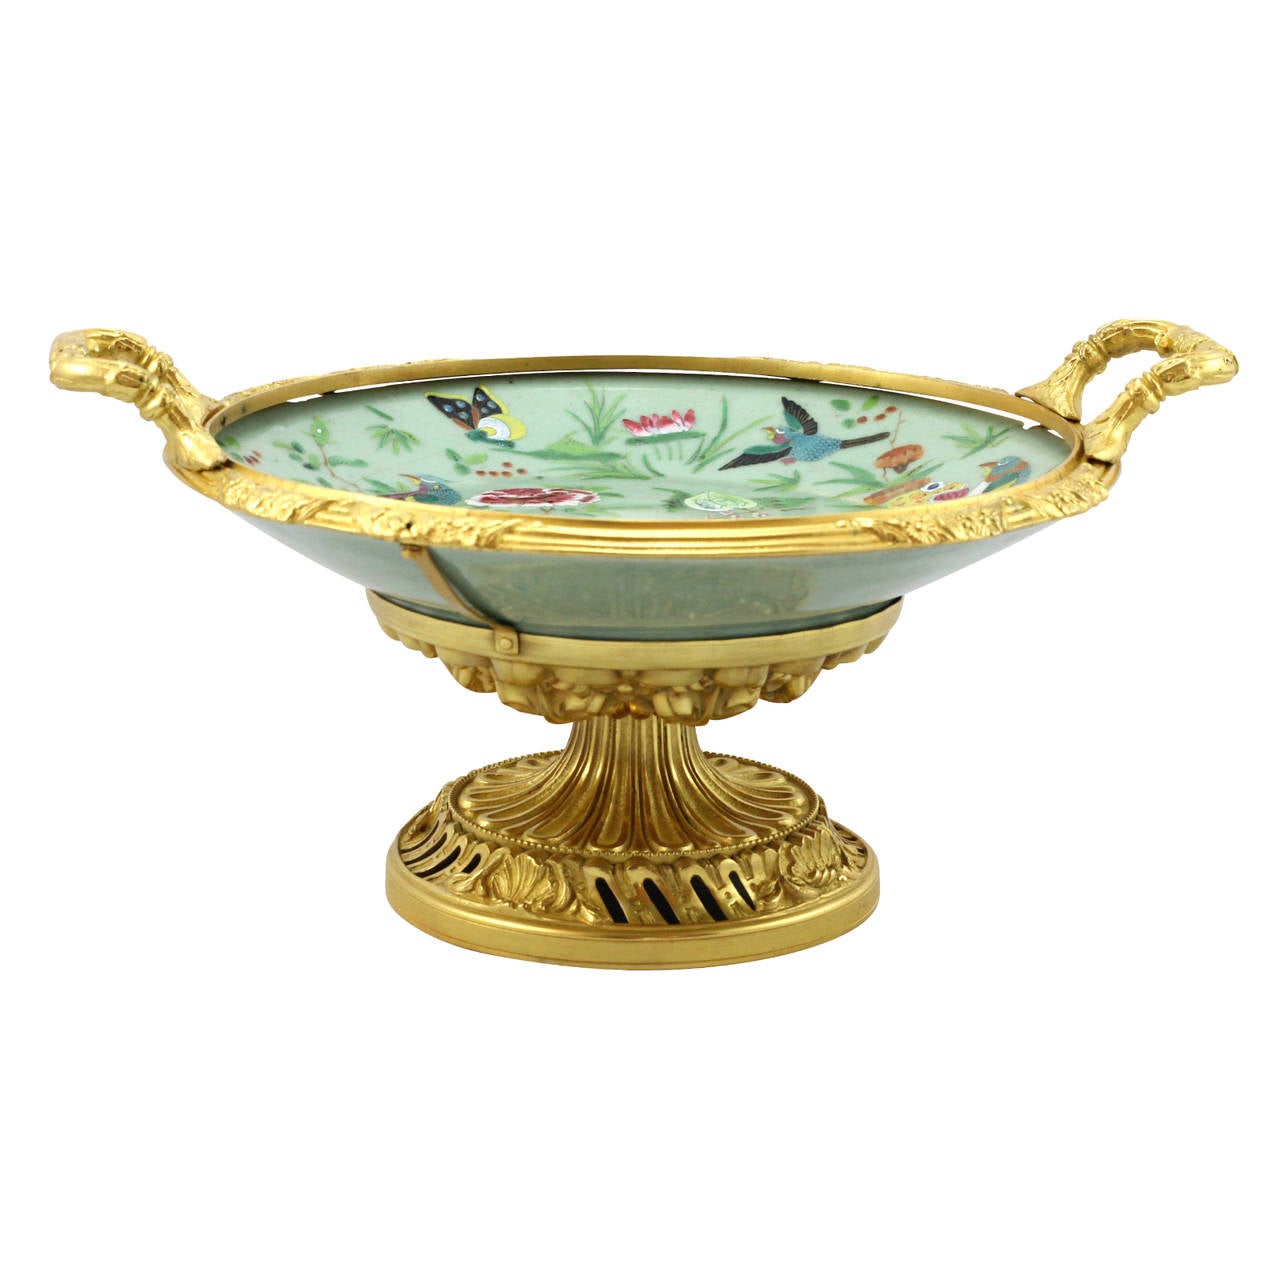 Qing Chinese Celadon Tazza with Ormolu Mounts